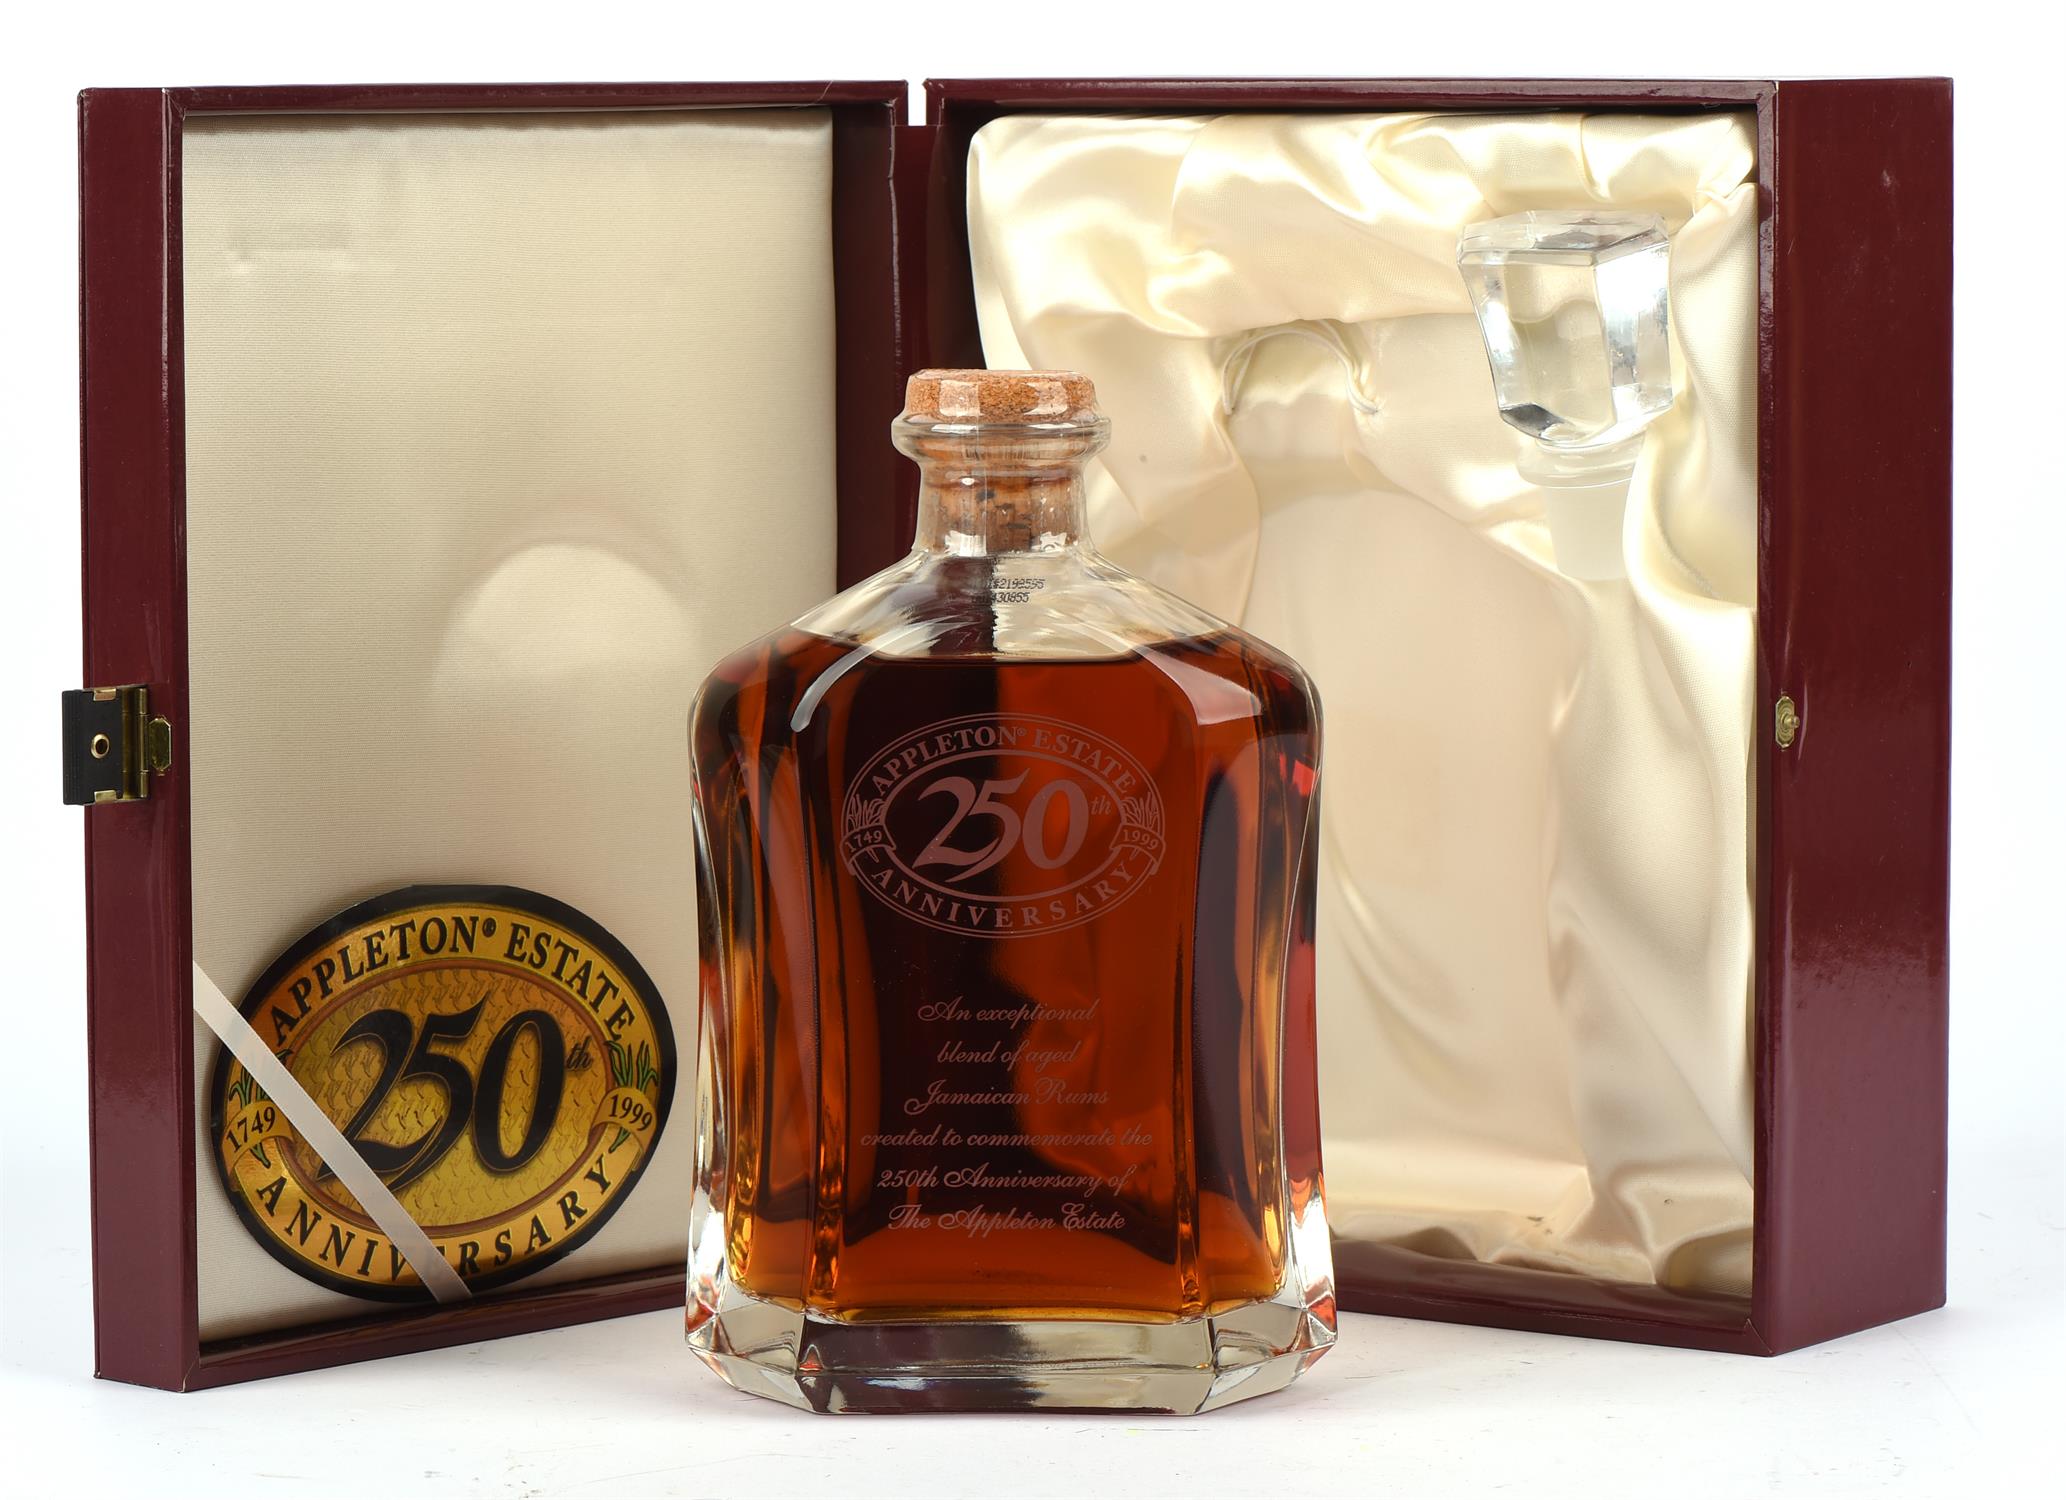 Appleton Estate, 250 year anniversary bottle of rum, in a decanter with stopper, boxed, - Image 2 of 2